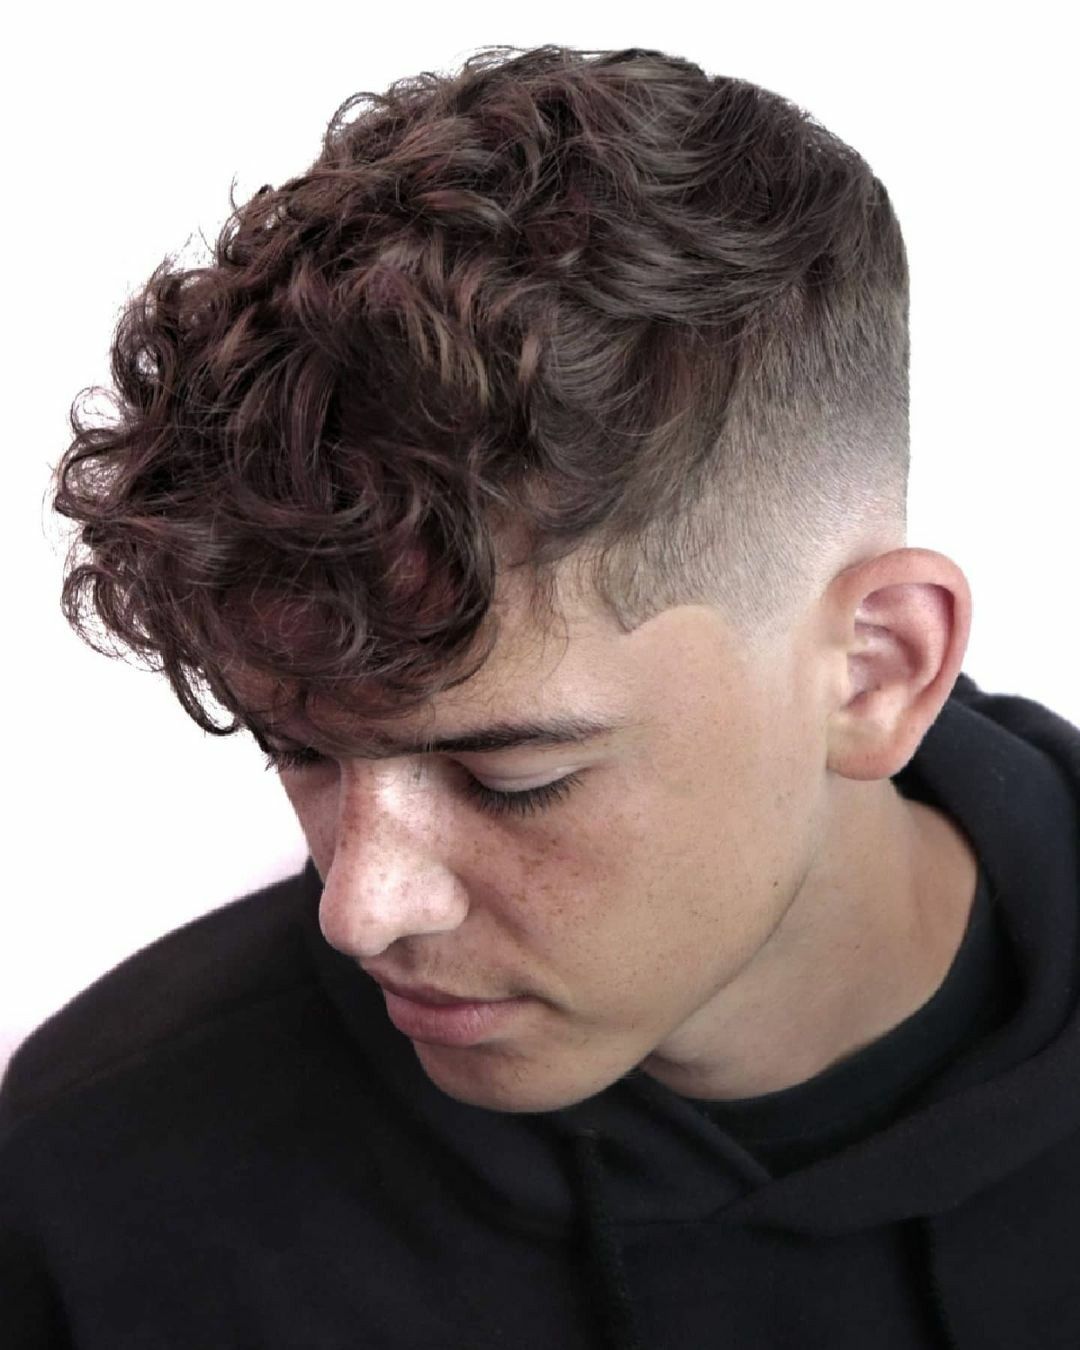 perm hairstyle for men 258 Asian male perm Hairstyles | Best perm hairstyles | perm hairstyles Perm hairstyles for Men